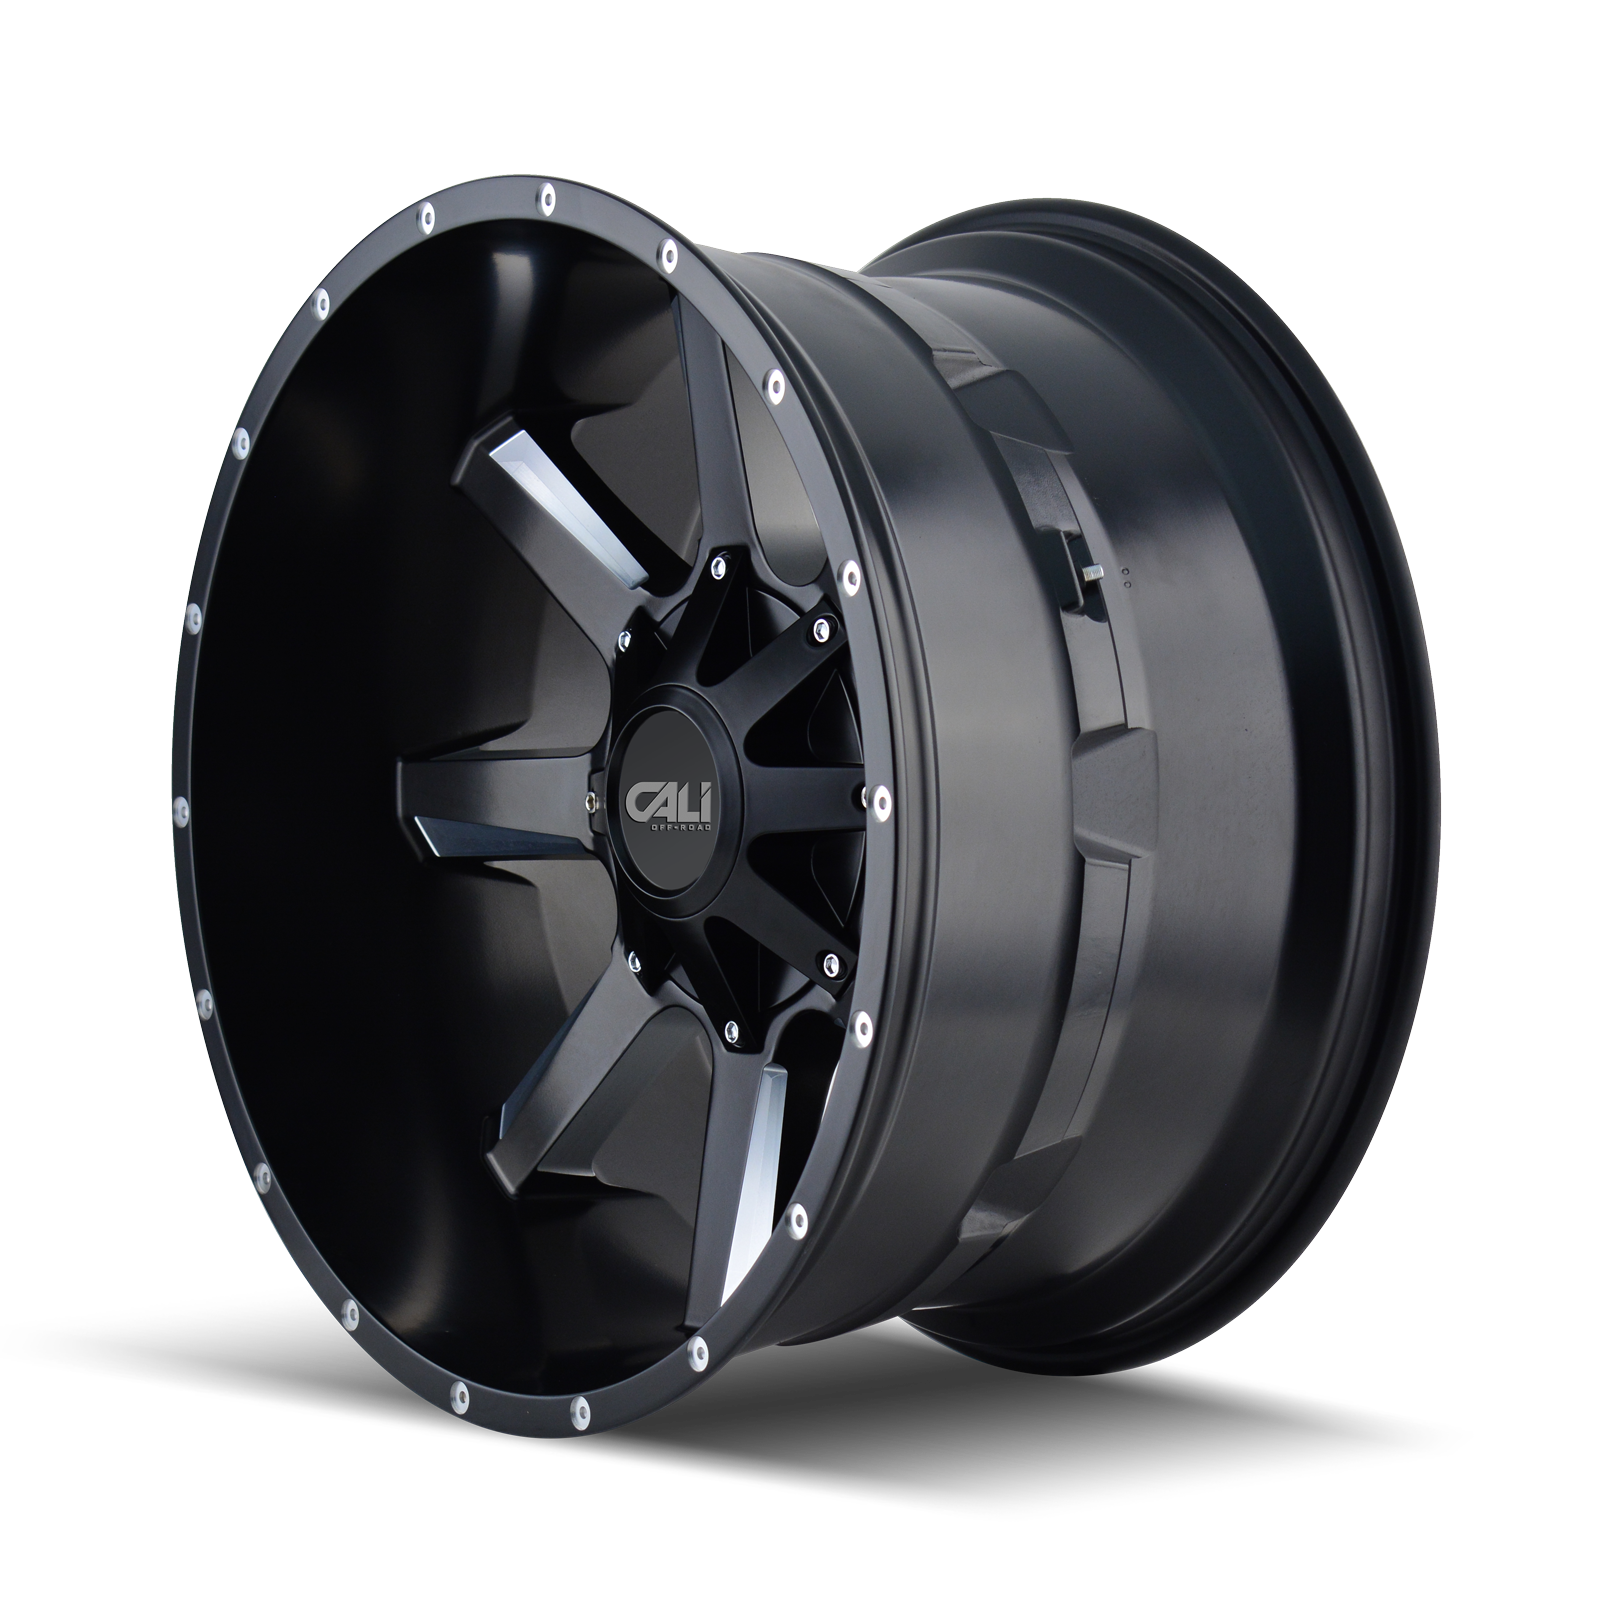 Cali Off-road BUSTED Satin black milled 20x9 0 6x135|6x139.7mm 106mm